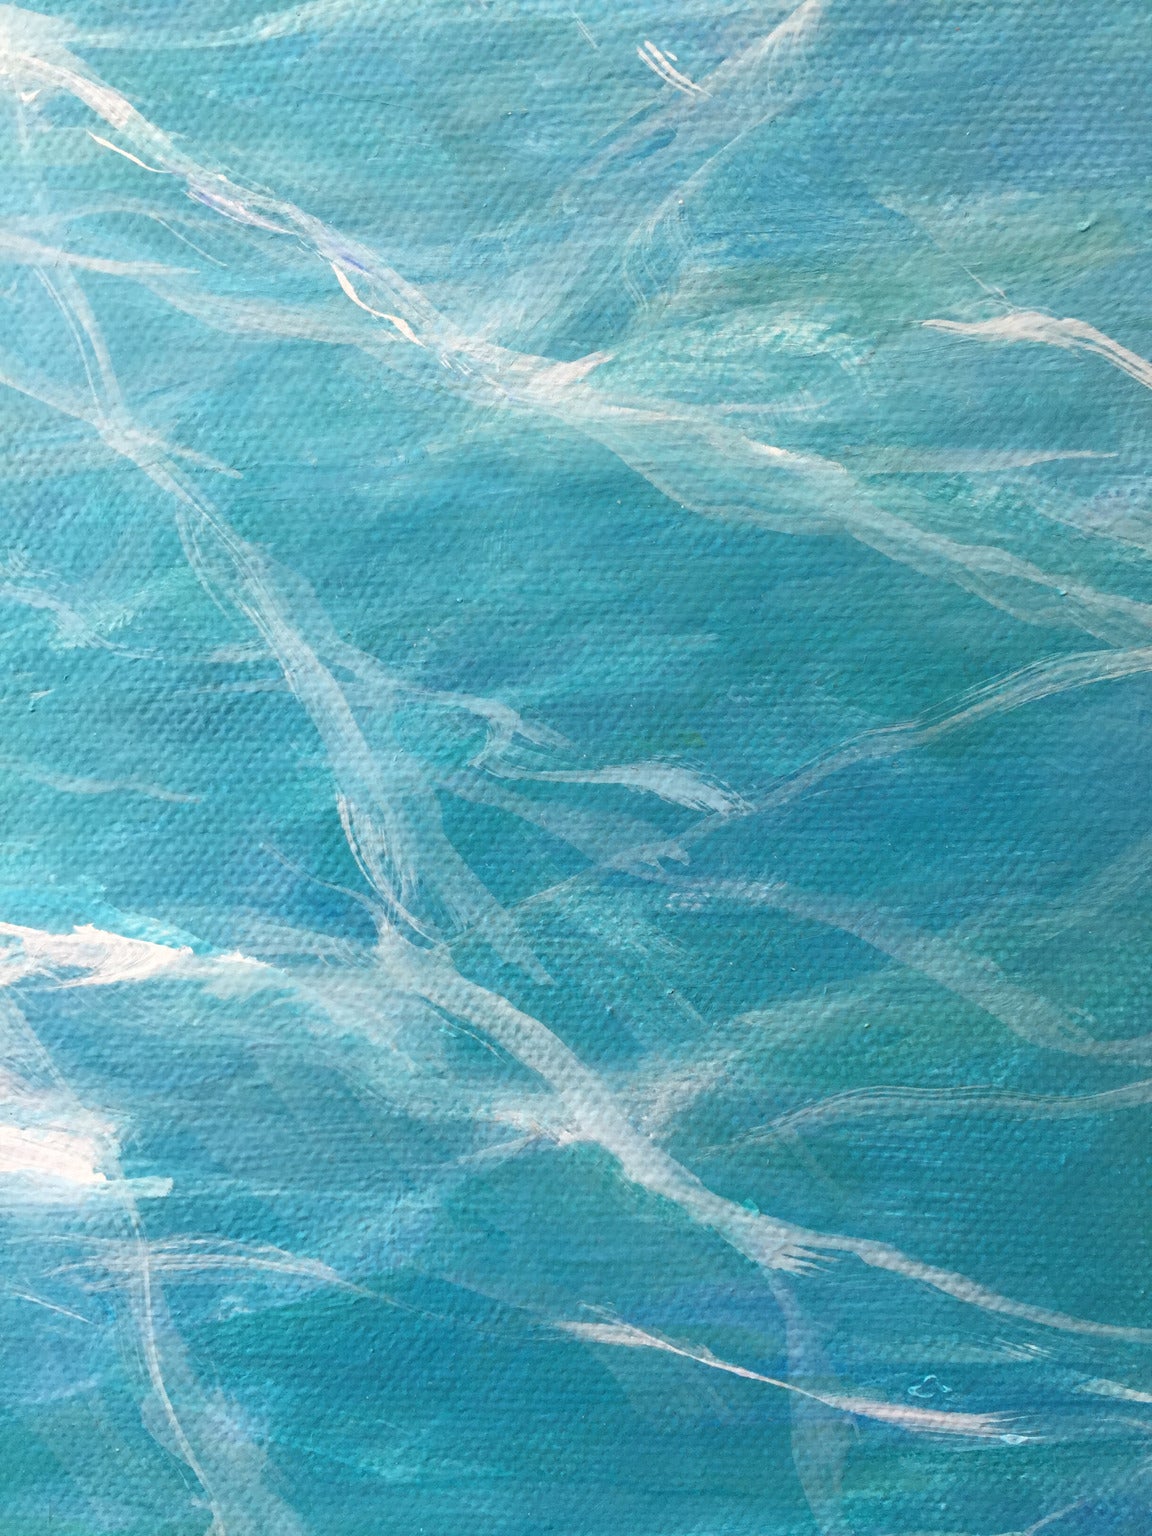 Pool Water II - Painting by Megan Ruch